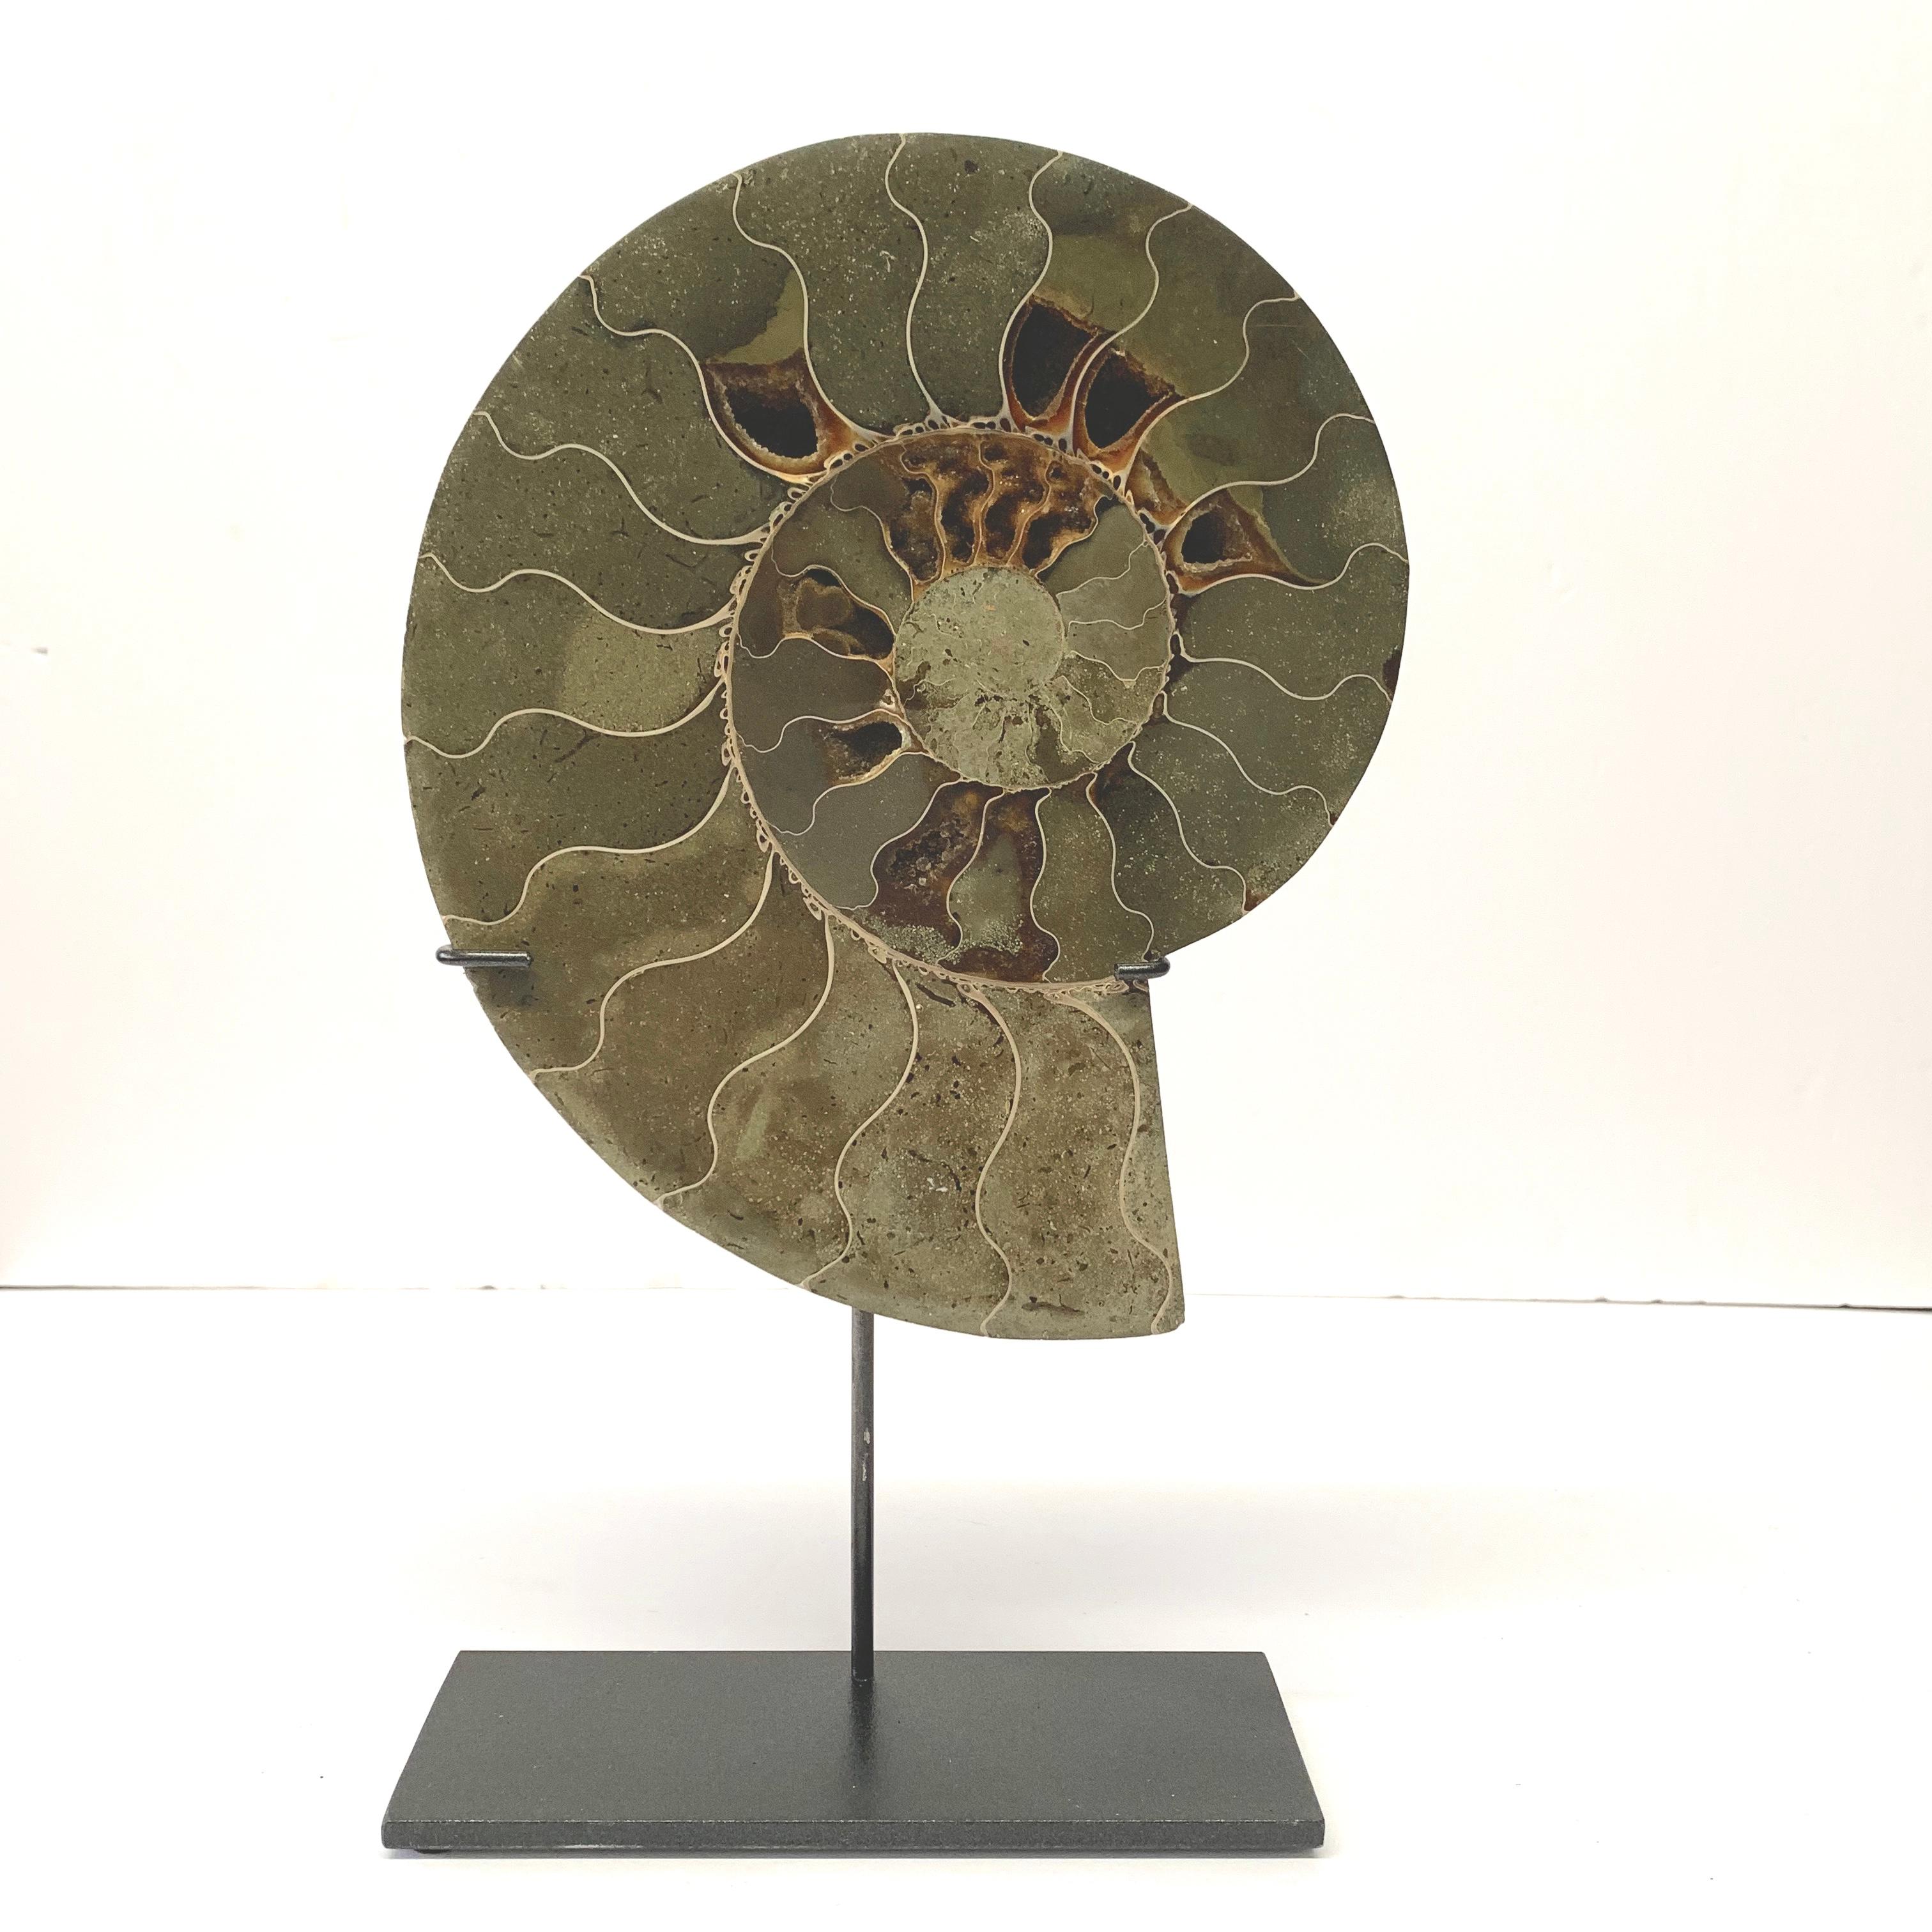 Pair of polished ammonite sculptures from Madagascar
Custom steel stand
One of many from a large collection
Measures: Ammonite A 7